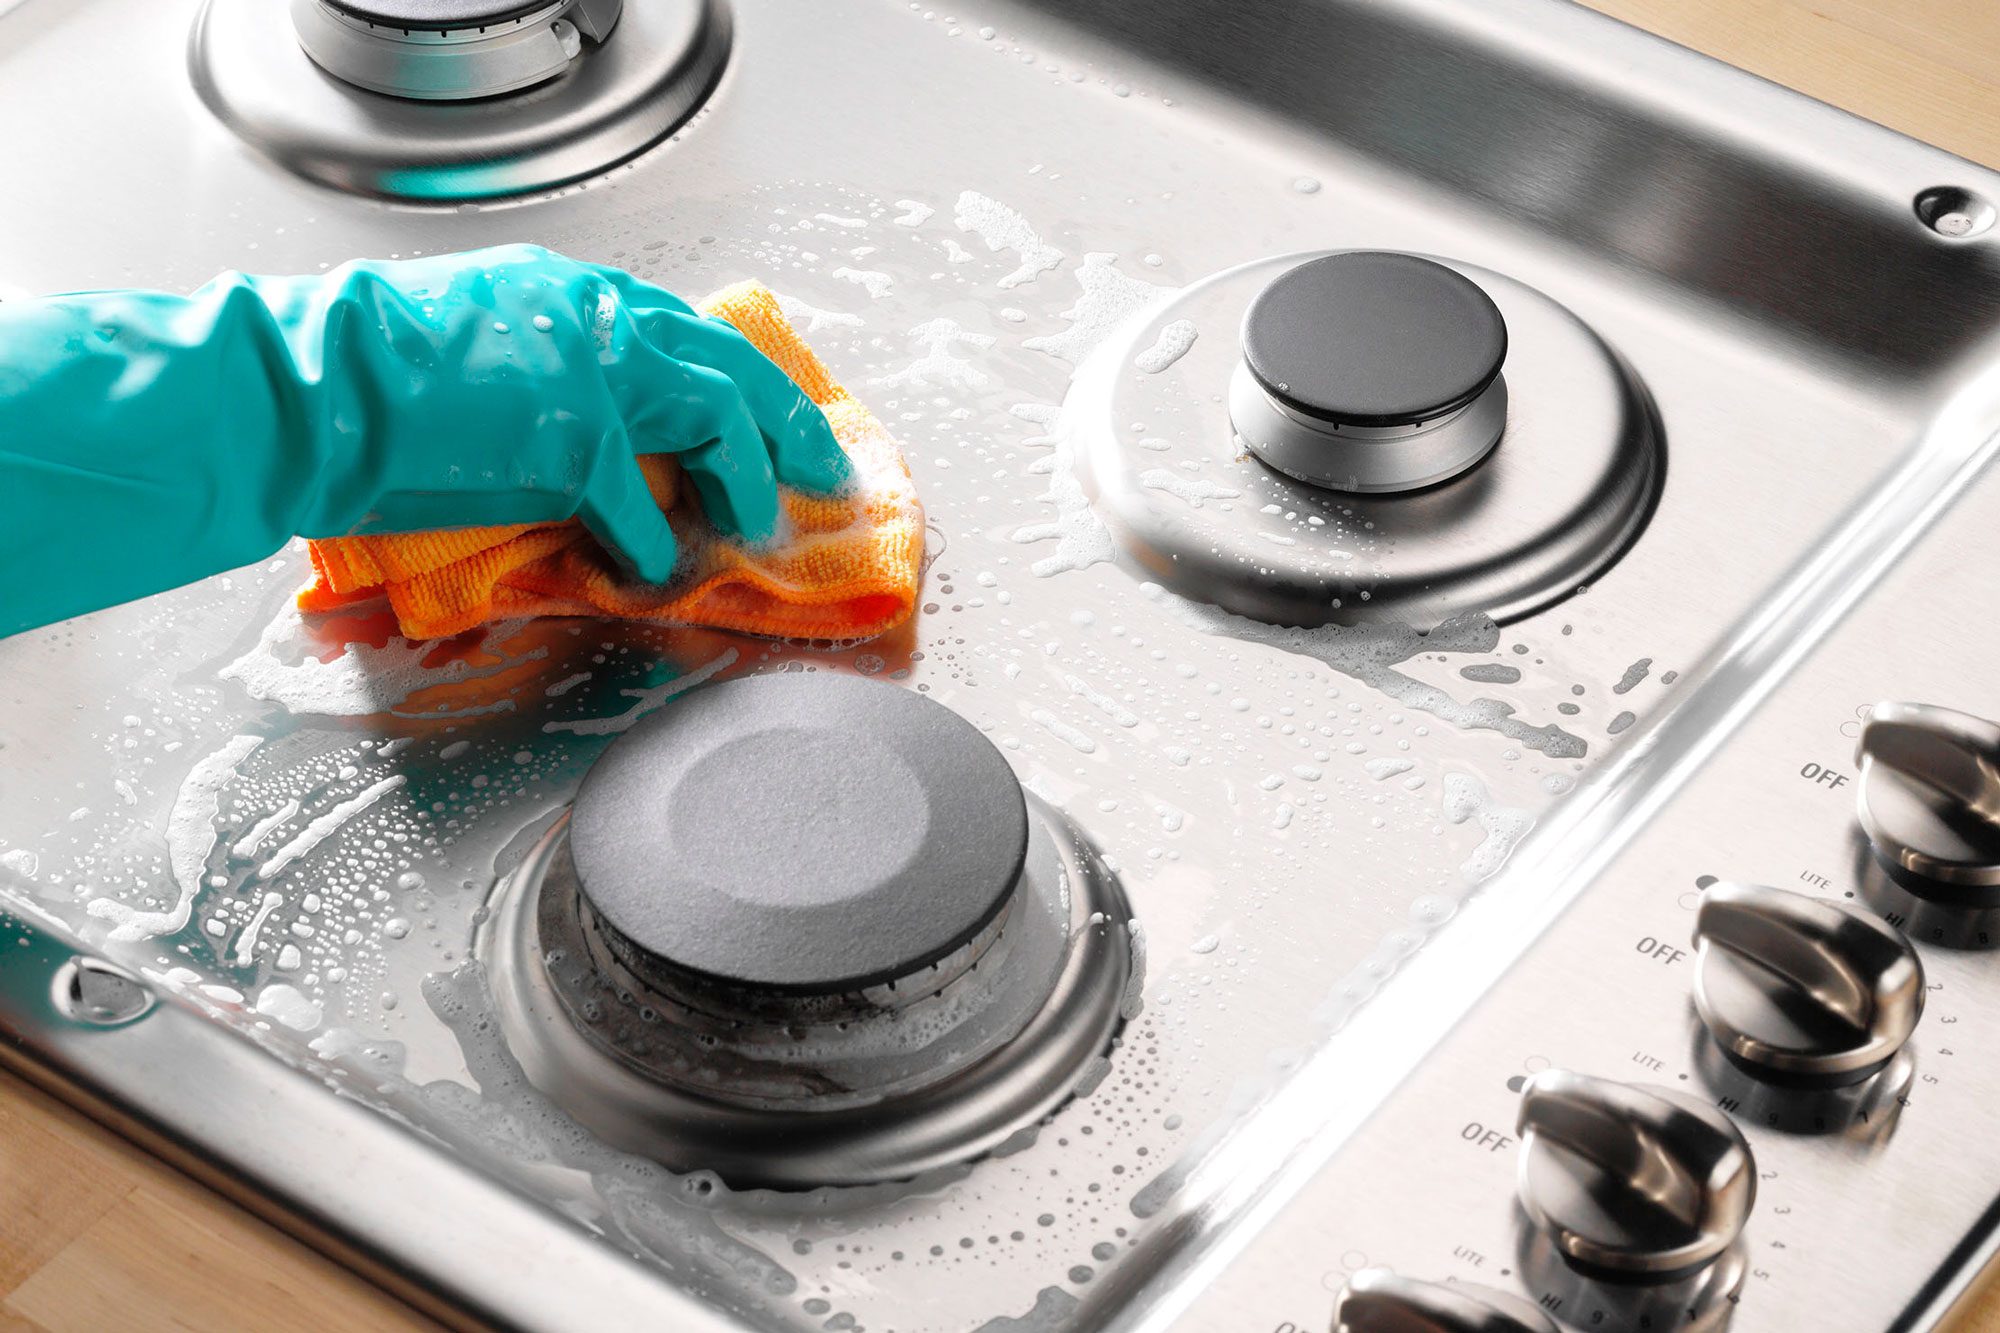 https://www.rd.com/wp-content/uploads/2023/03/How-to-Clean-a-Gas-Stovetop-RDDC2303_PU6207_P4onP2_MD_03_15_2b-scrub-the-surface.jpg?fit=680%2C454